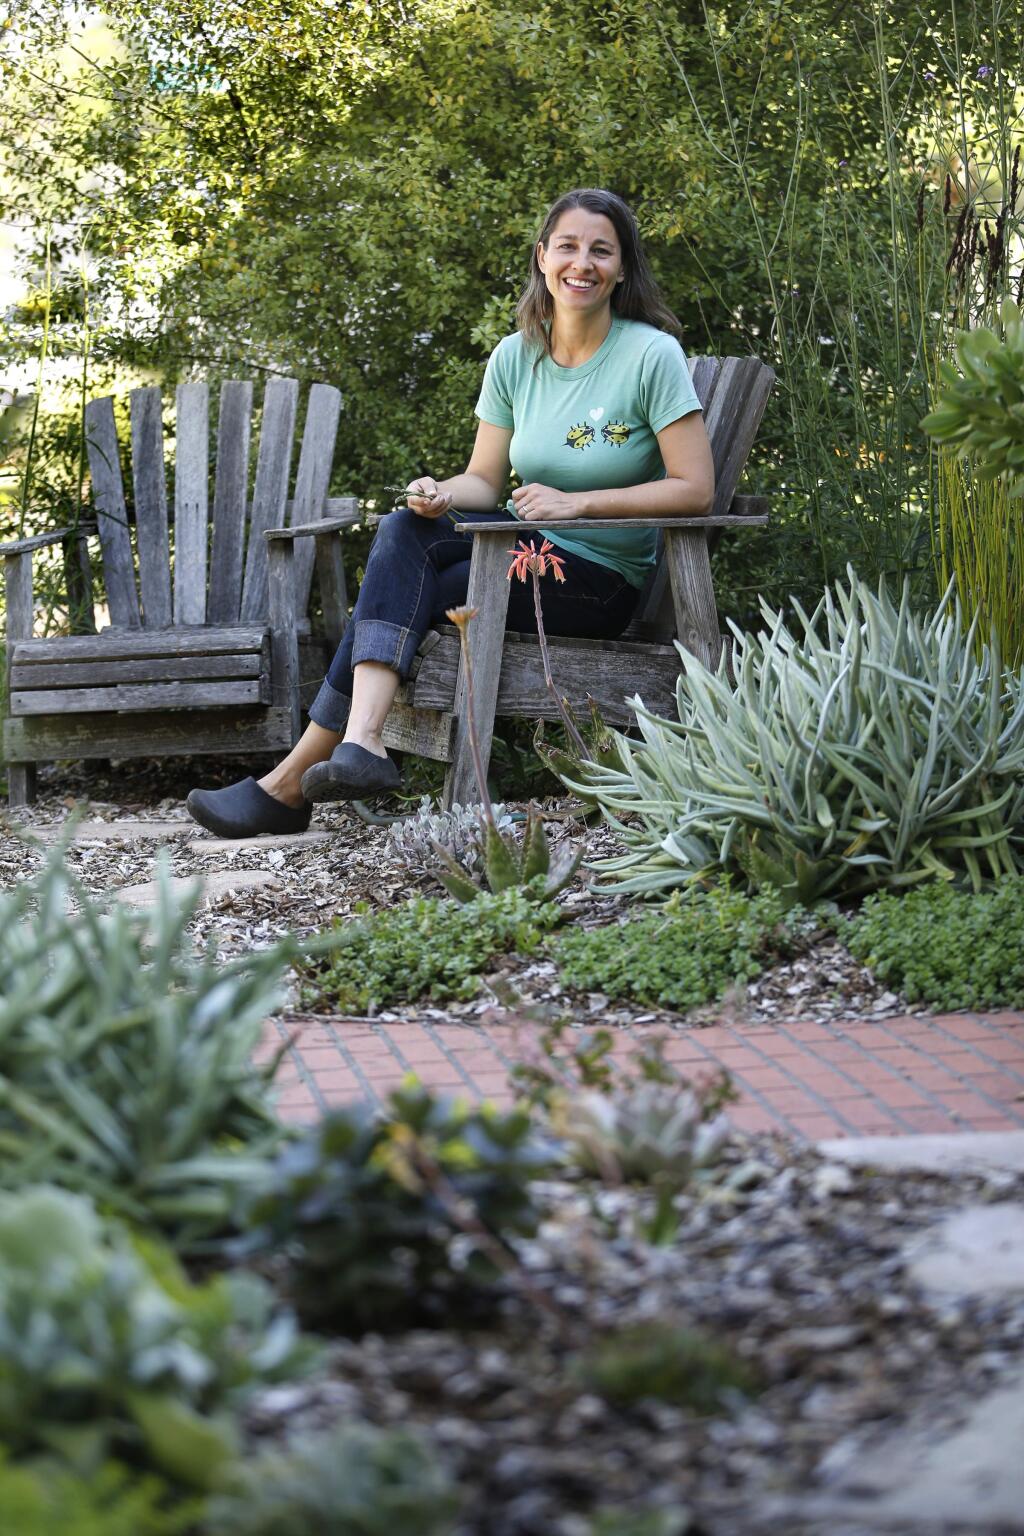 Photos by BETH SCHLANKER / The Press DemocratKirsten Miller in her “pretty much finished” Santa Rosa garden, where she replaced a lawn with drought-tolerant plants such as euphorbia, olive, verbena, mimulus, nepeta, erigeron and assorted succulents, using greywater from the laundry.